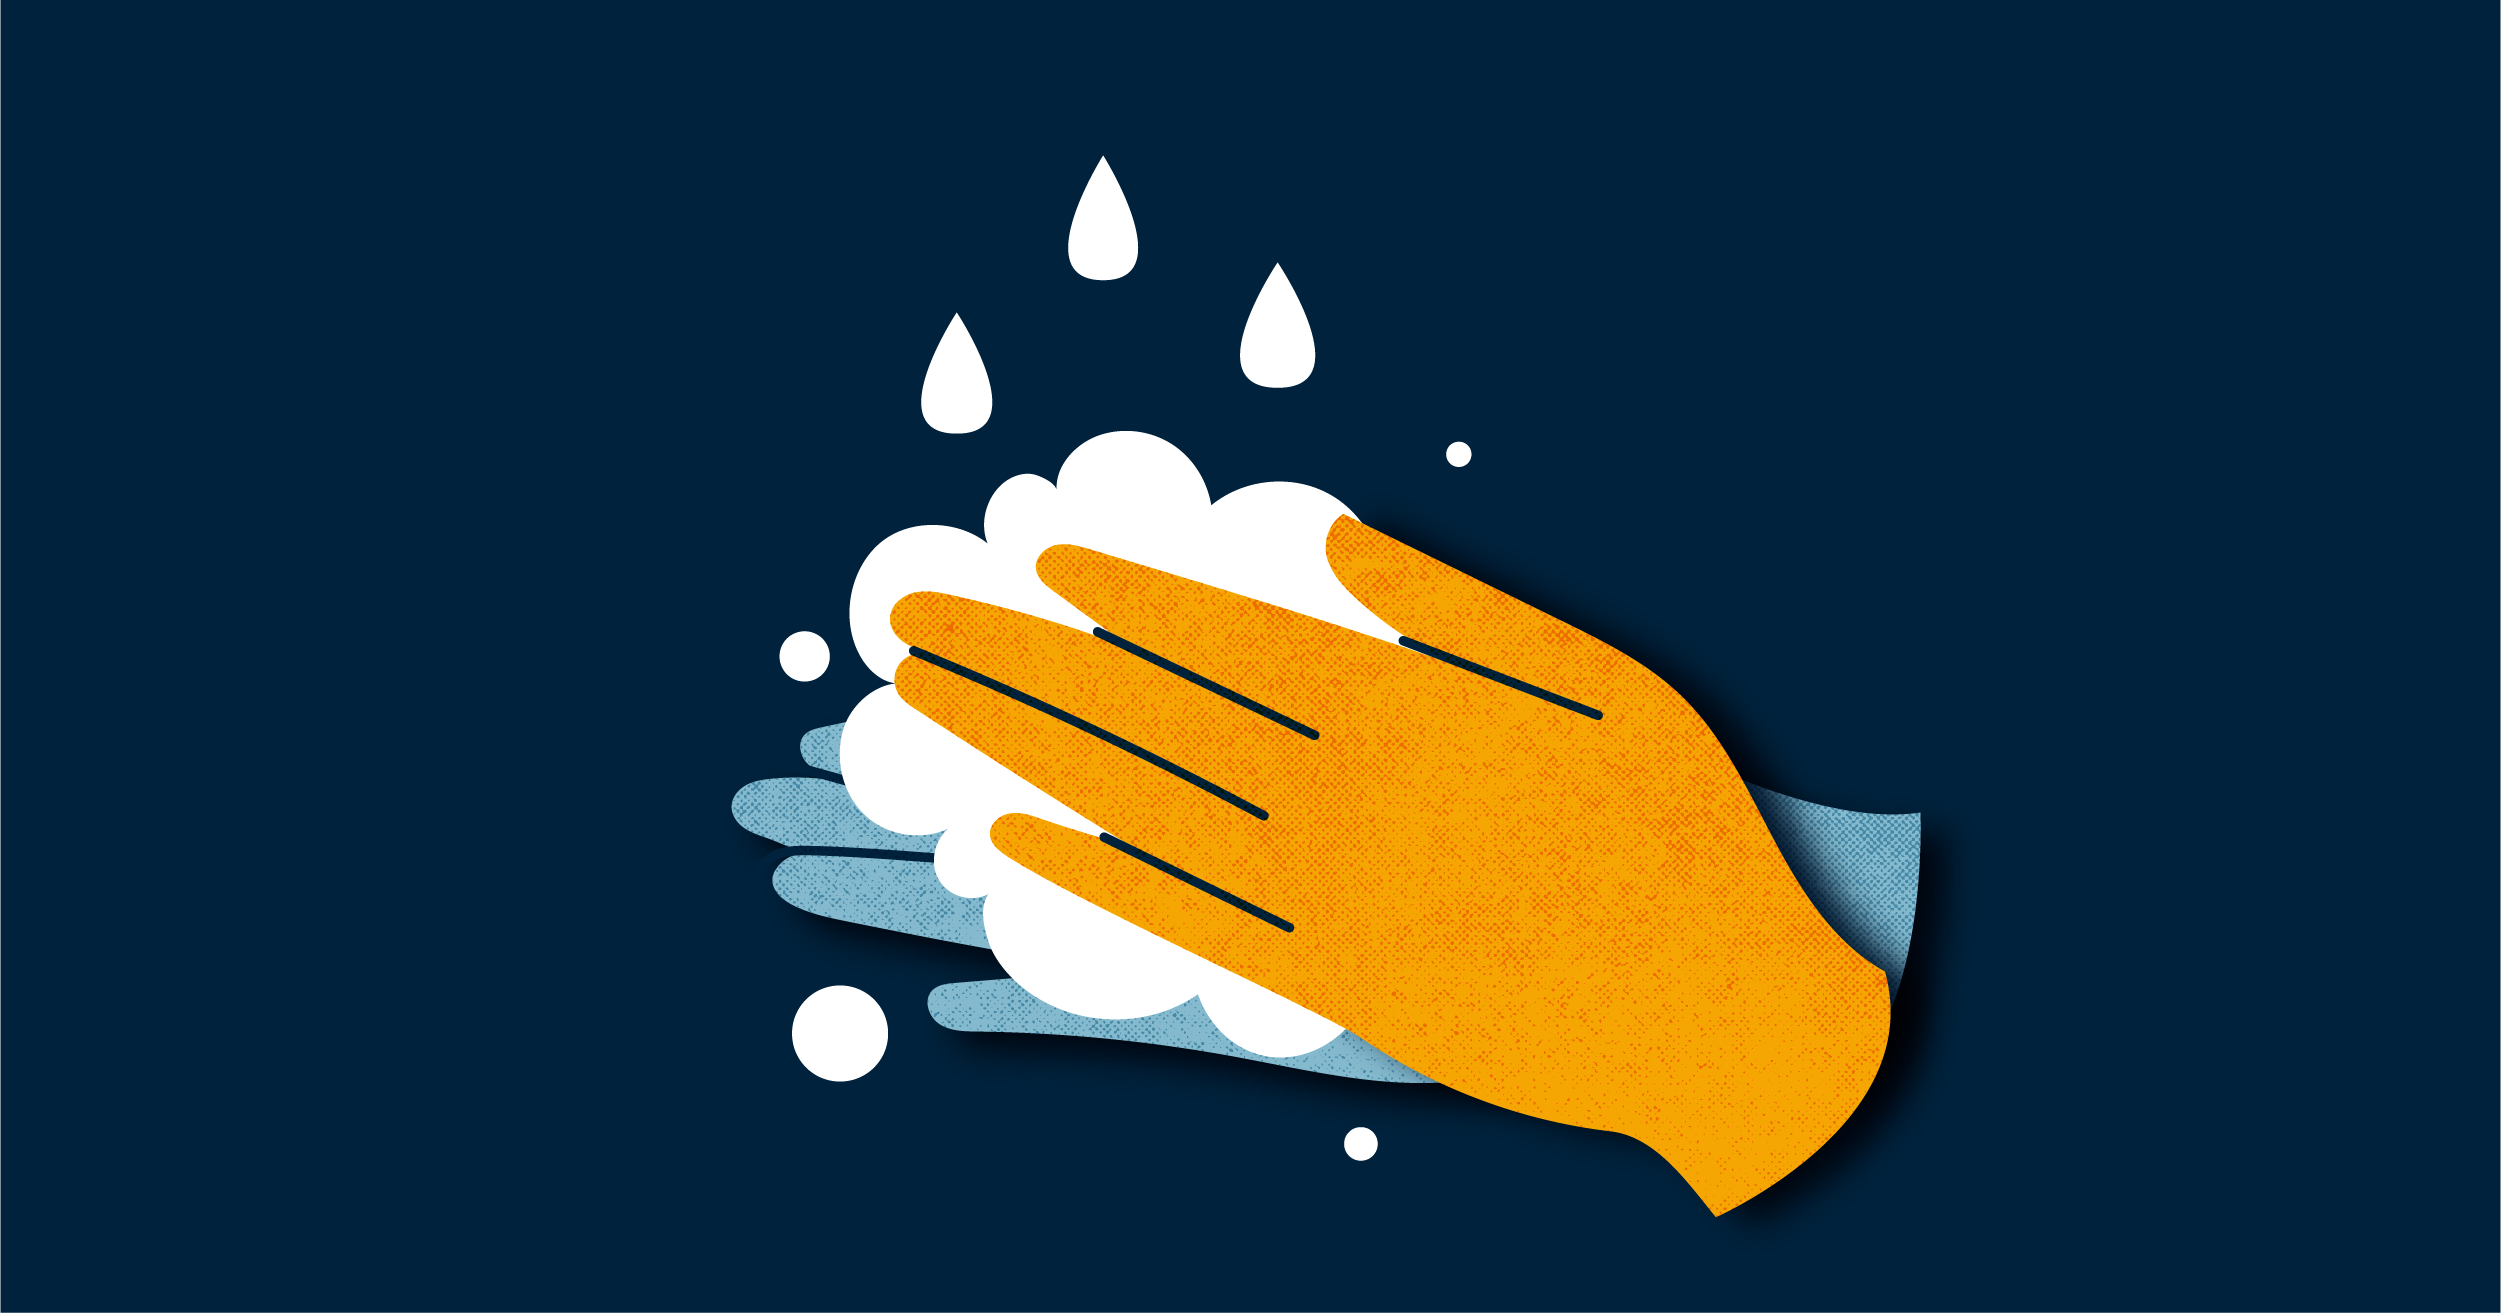 Regularly and thoroughly clean your hands, wash them with soap and water.